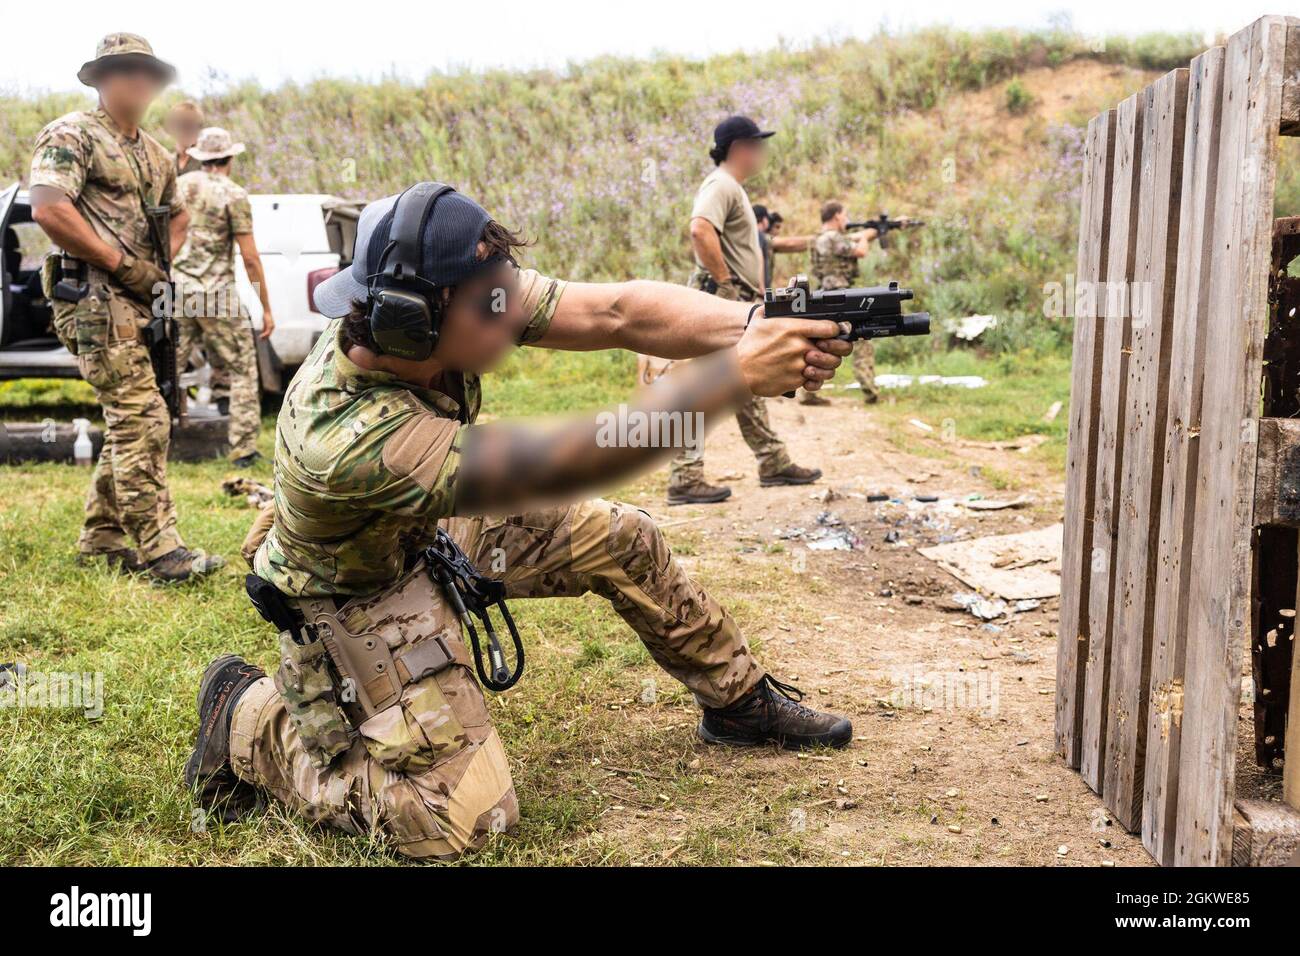 A U.S. Navy SEAL fires custom Glock 17 pistol at a range during exercise Sea Breeze 21 in Ochakiv, Ukraine, July 8, 2021. Sea Breeze 21 is a U.S. and Ukraine co-hosted multinational maritime exercise held in the Black Sea designed to enhance interoperability of participating nations and strengthen maritime security within the region. Stock Photo